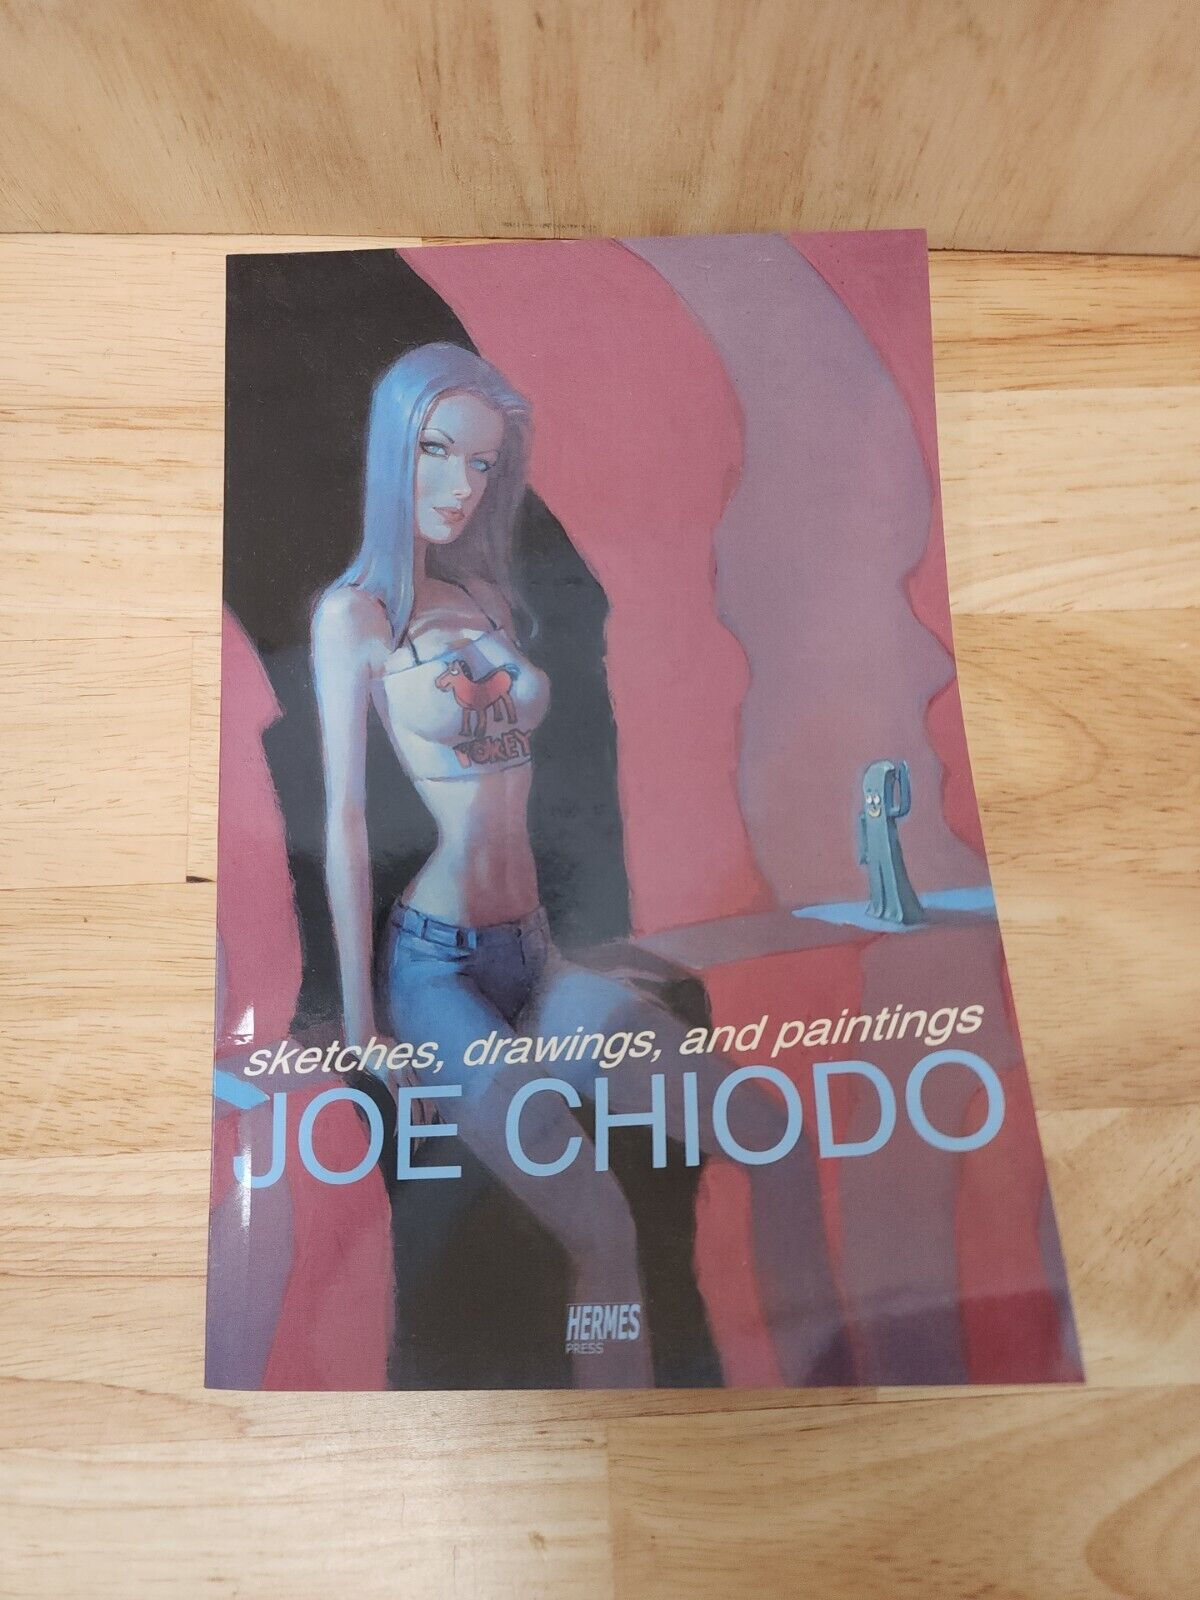 RARE Sketches, Drawings, and Paintings by Joe Chiodo (2006, Trade Paperback)